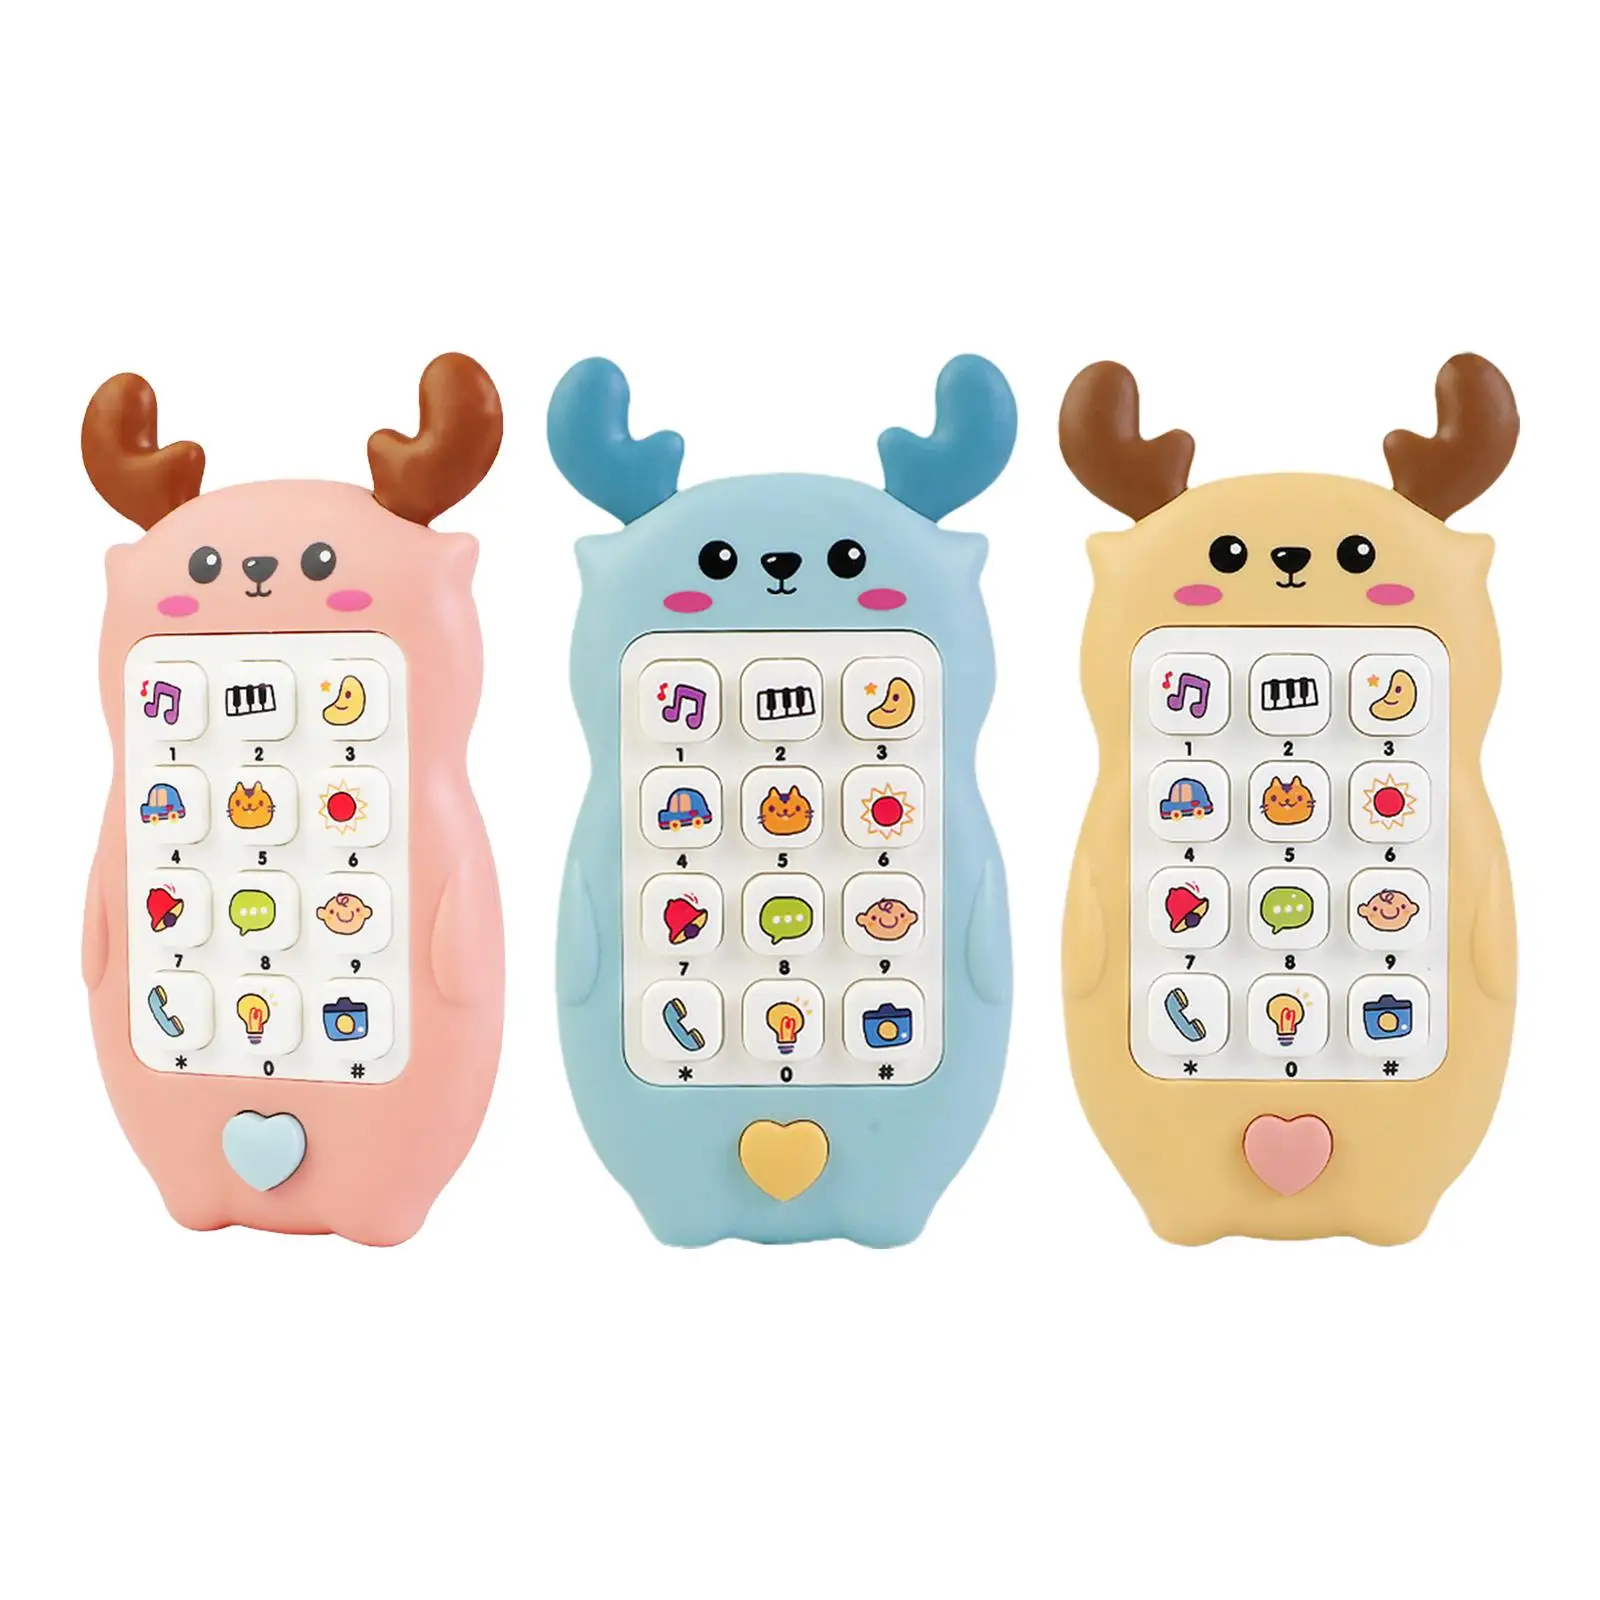 

Smartphone Toys Various Musics Sounds Early Educational Pretend Phone Toys for 6 Months+ Infants Boys Girls